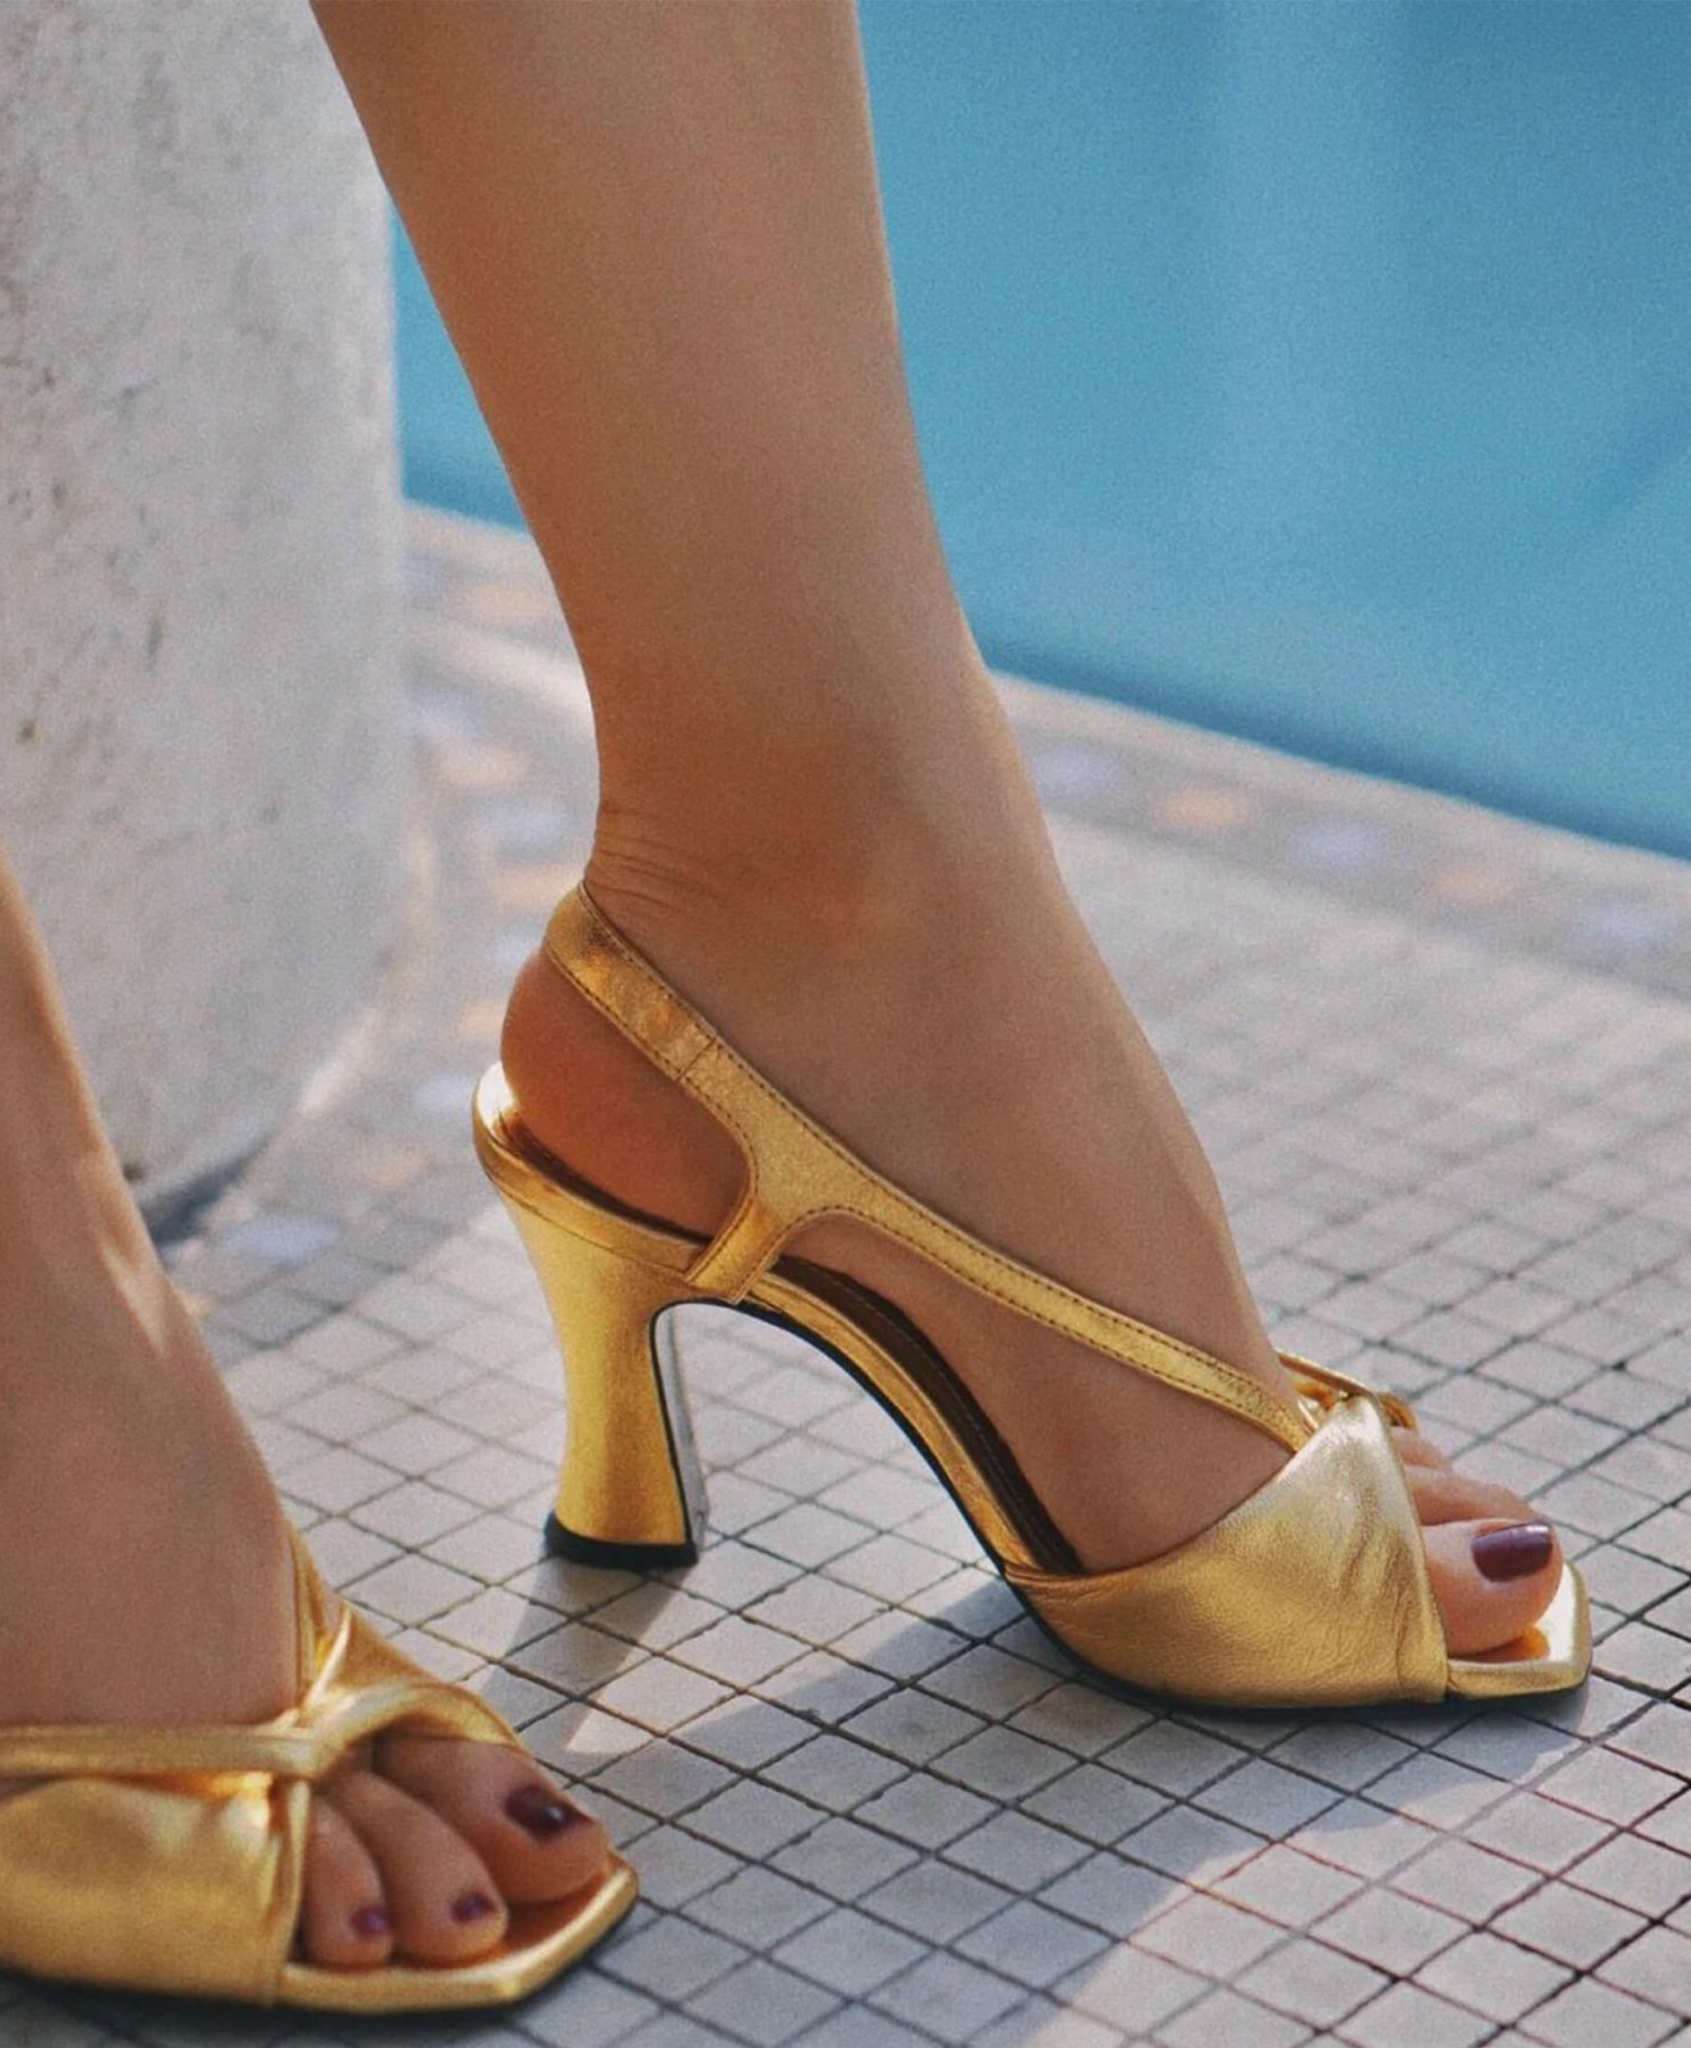 CAREL PARIS 1952 SPRING 2023 COLLECTION IMAGE: PRODUCTS FEATURED: CAREL GOLD PALACE SLING BACK PUMP